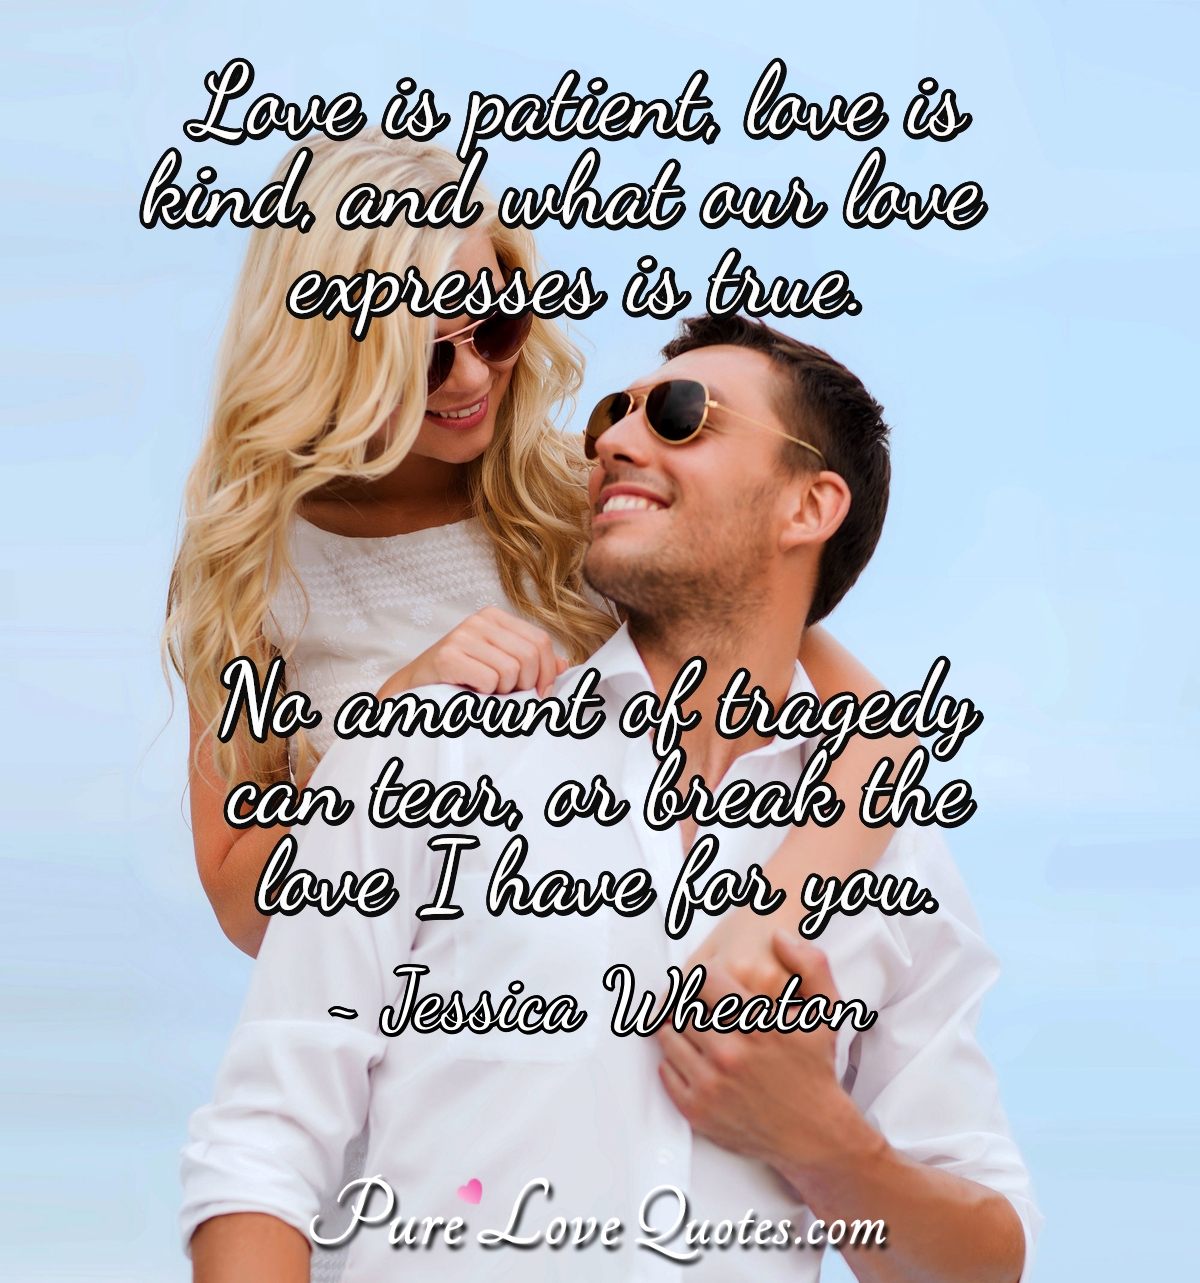 Love is patient, love is kind, and what our love expresses is true. No amount of tragedy can tear, or break the love I have for you. - Jessica Wheaton